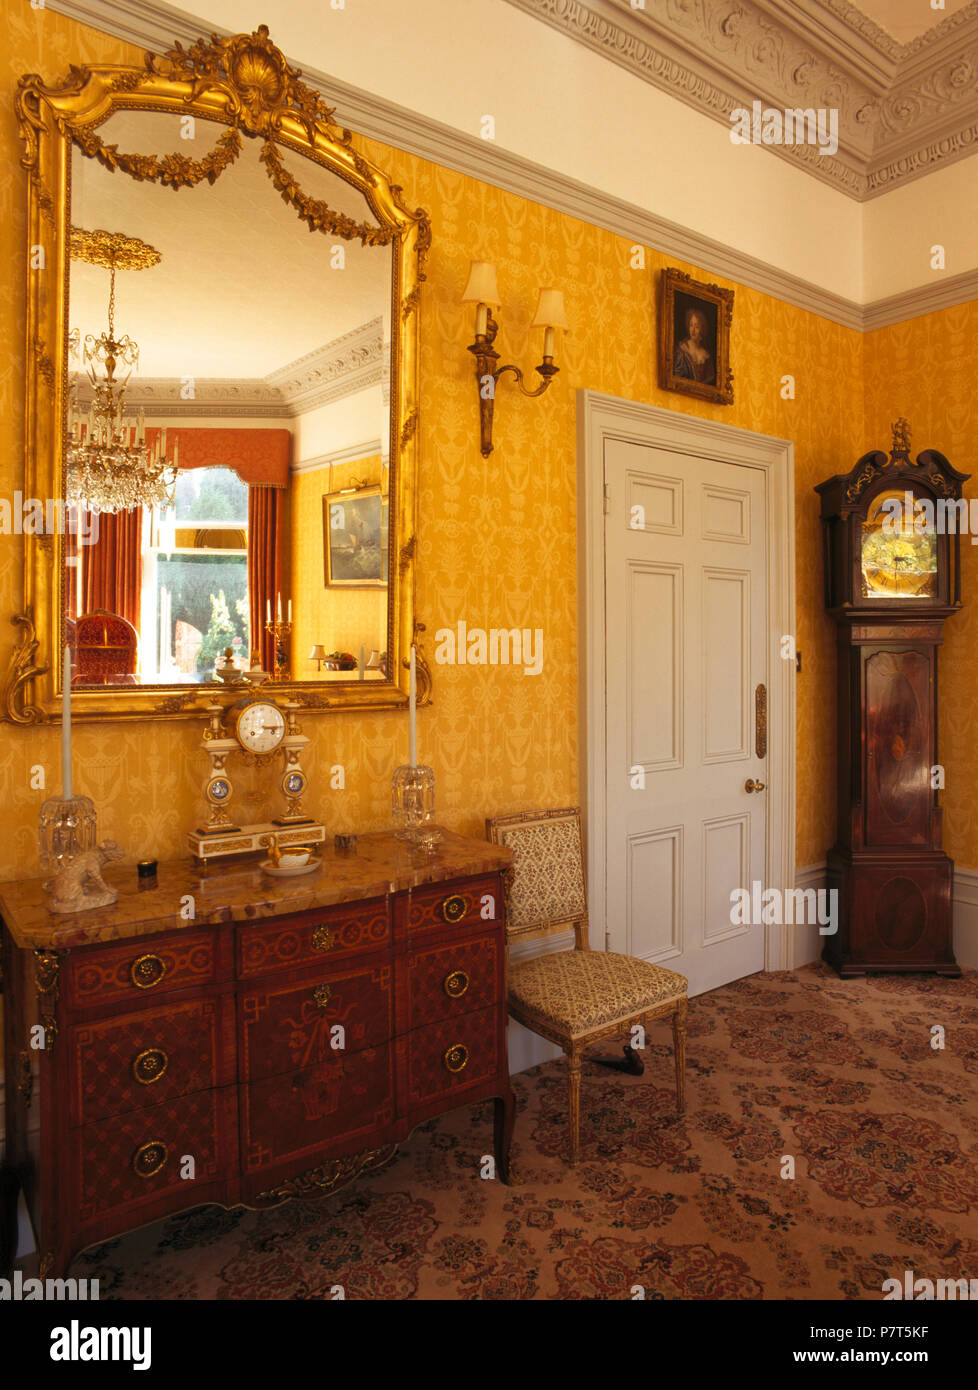 Large Antique Mirror And Chest Of Drawers In Yellow Drawing Room